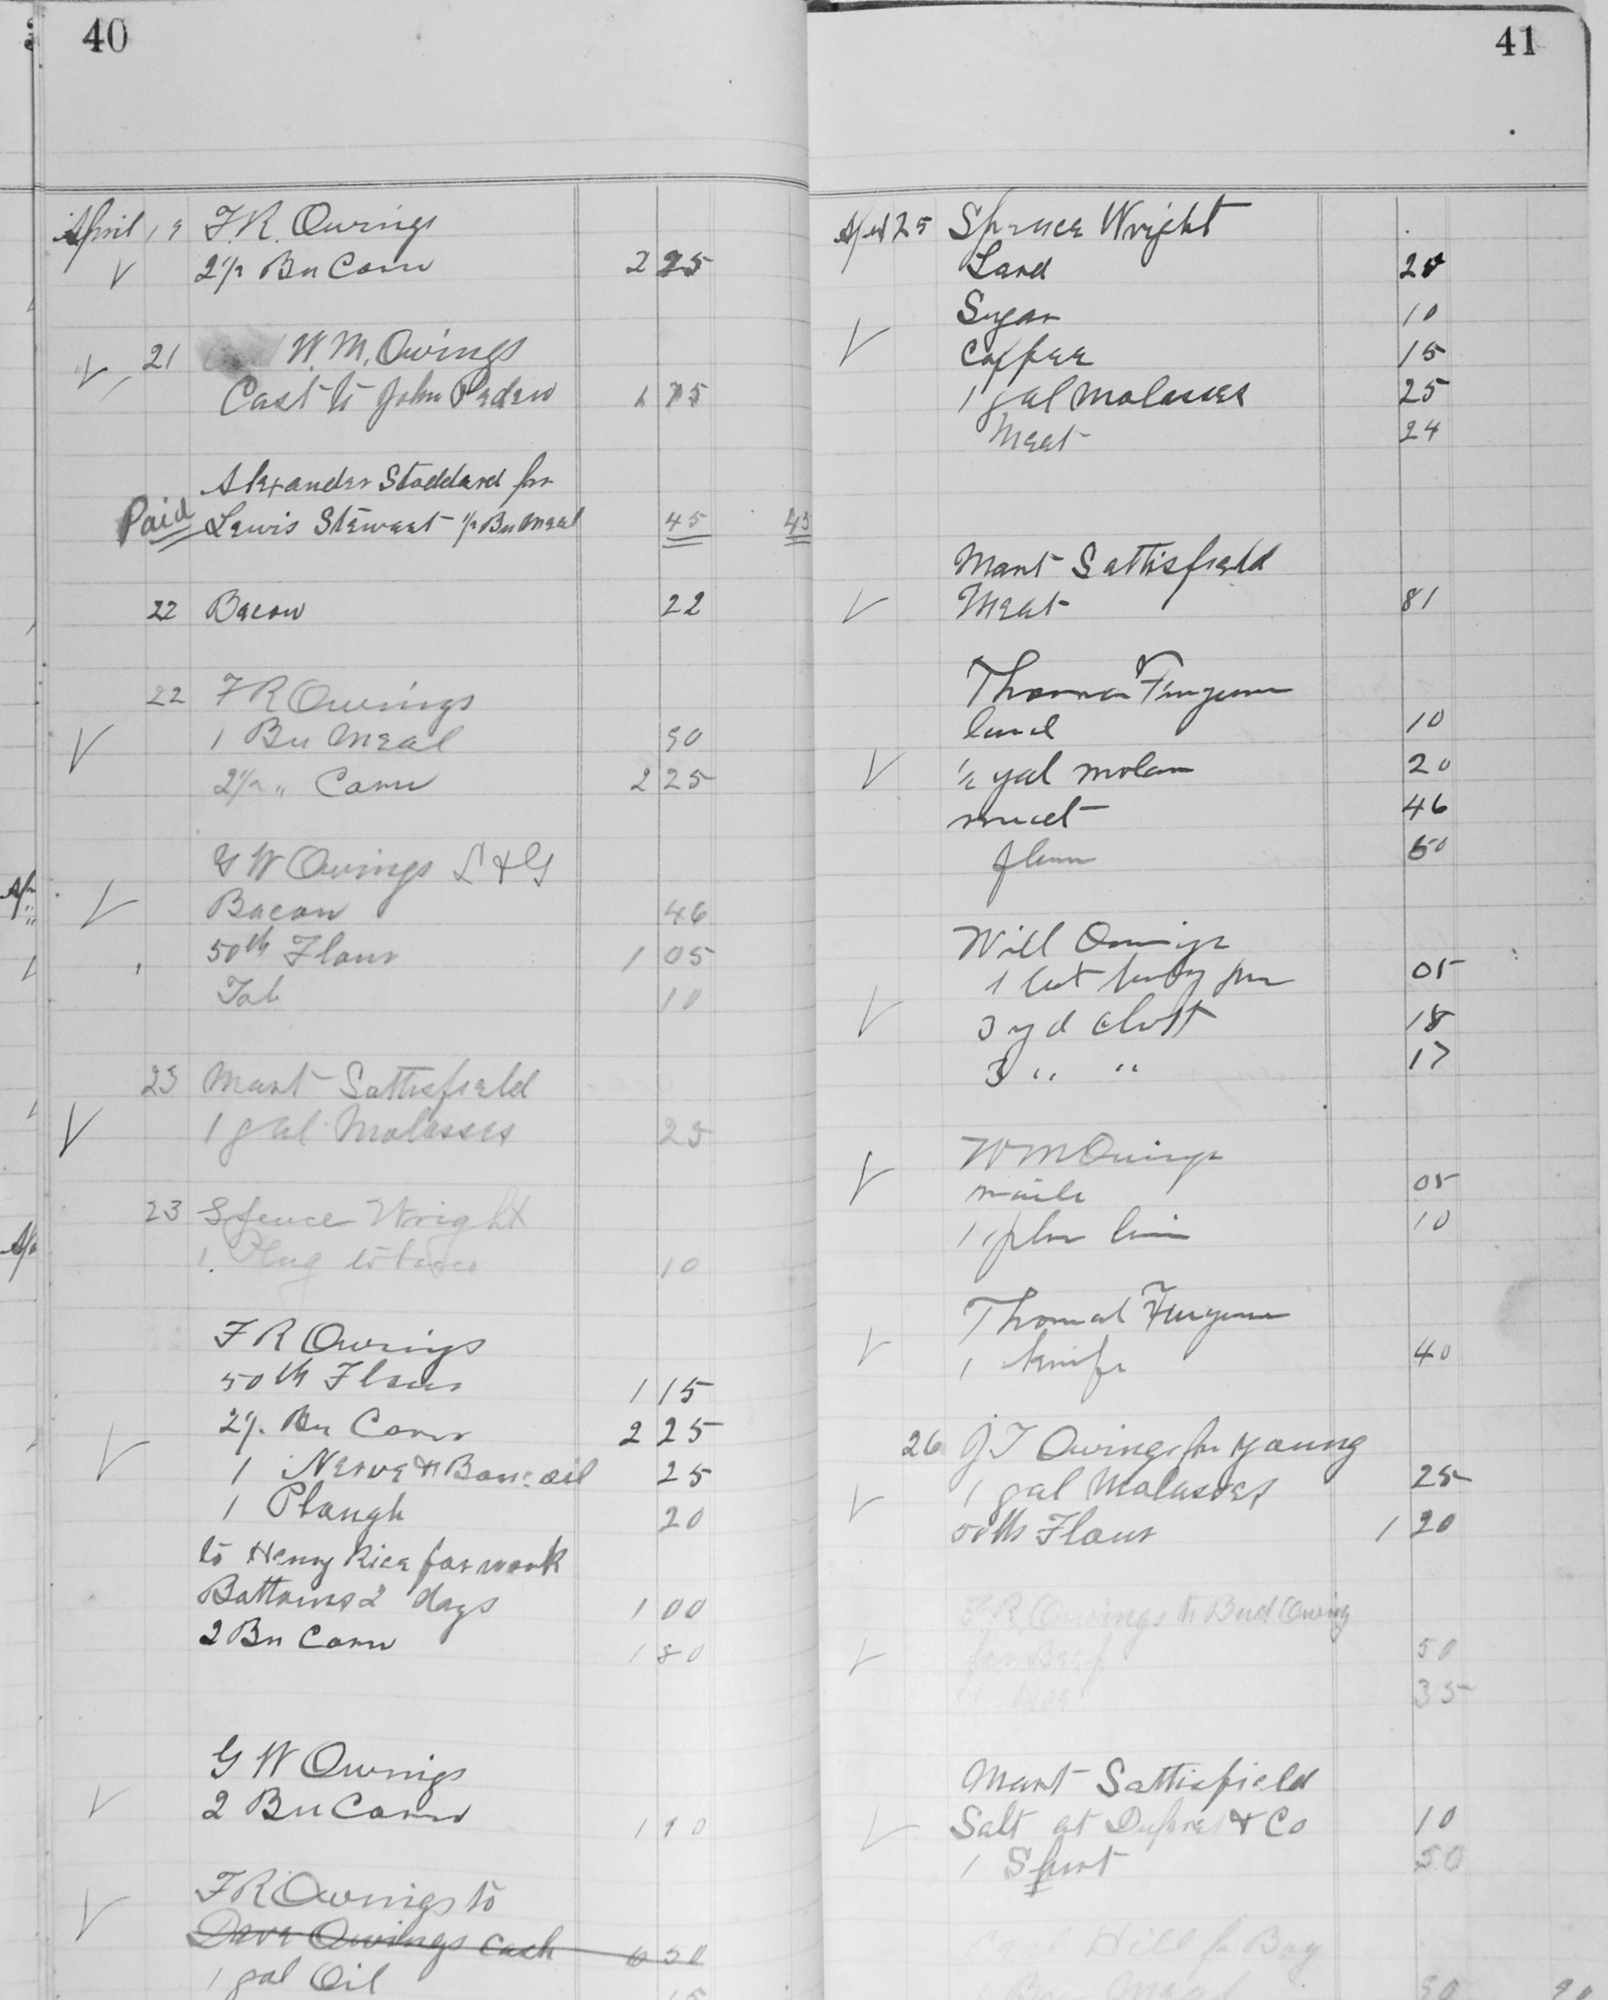 LEDGER PAGE FROM THE OWINGS STORE #1